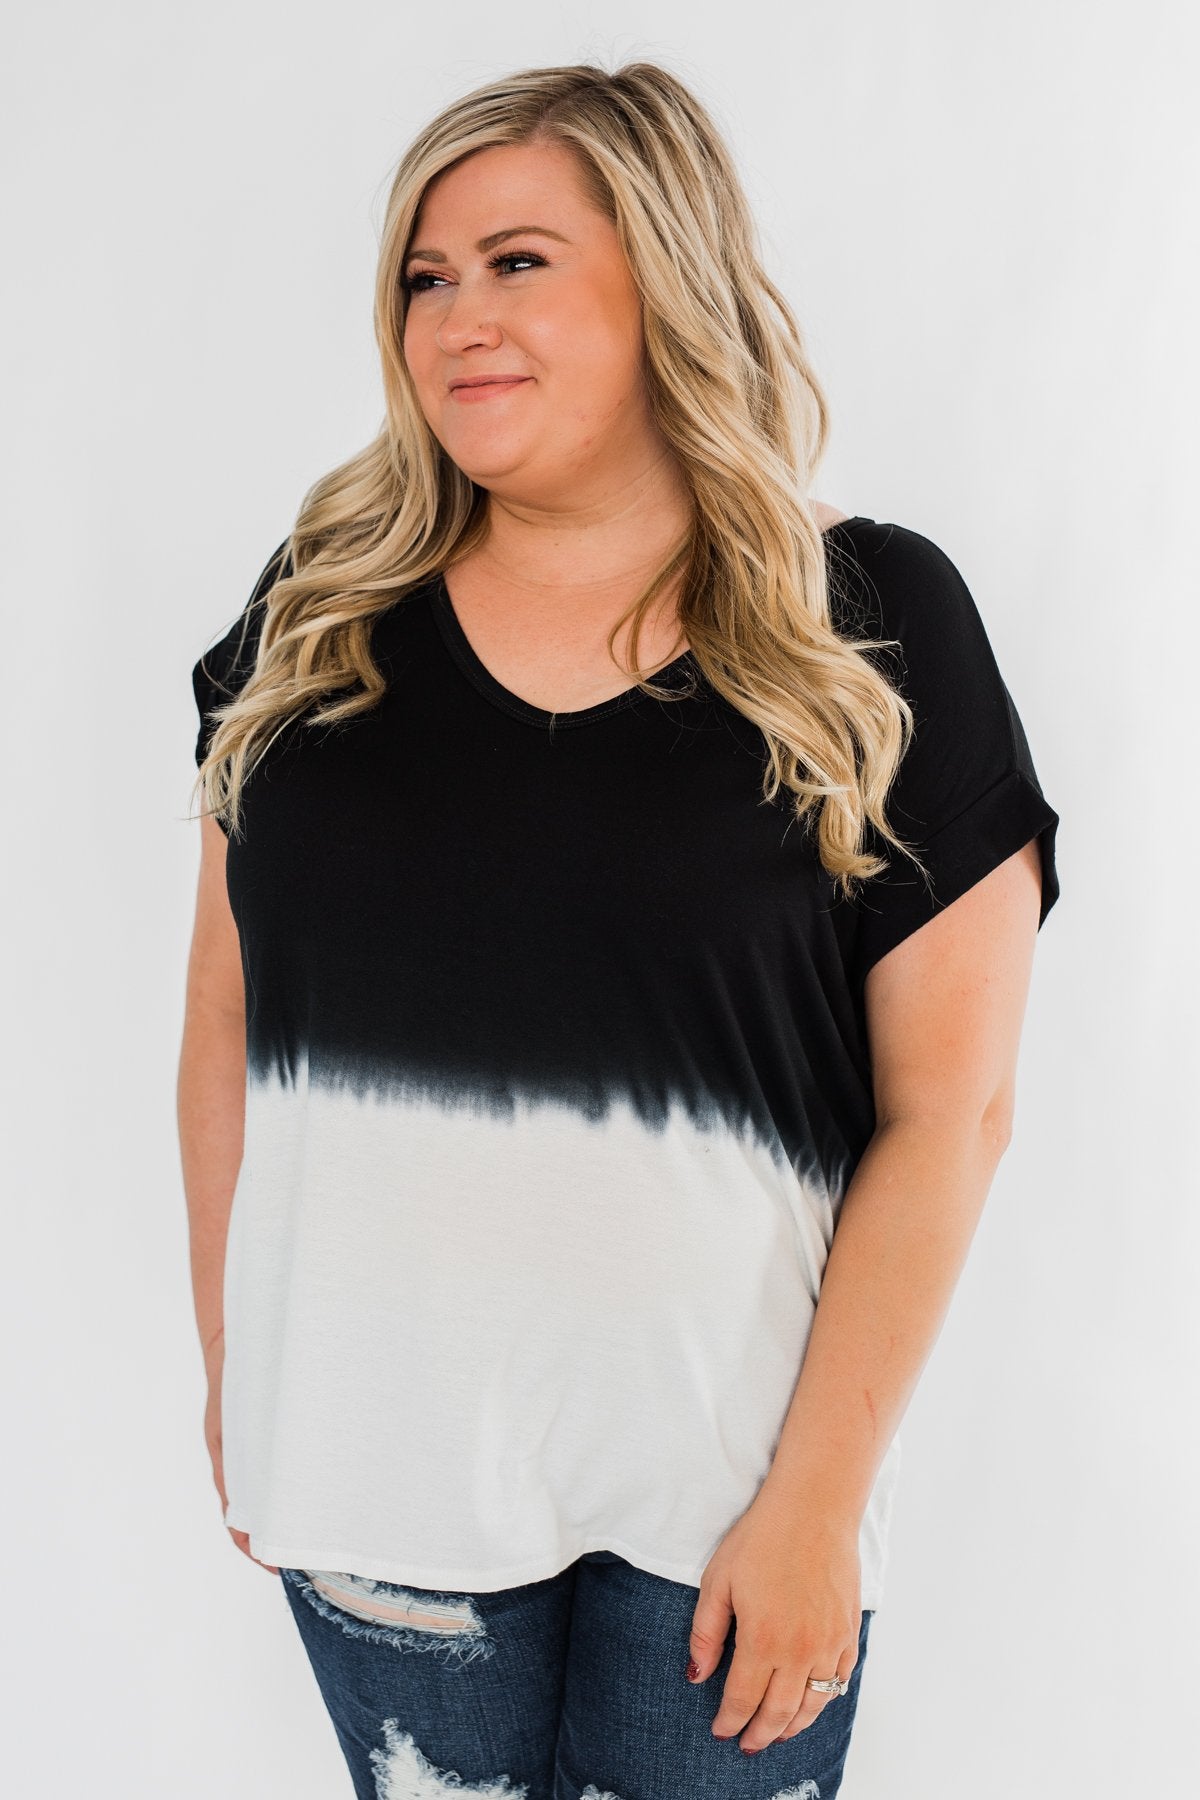 Leave You With A Smile Ombre Top- Black & Ivory